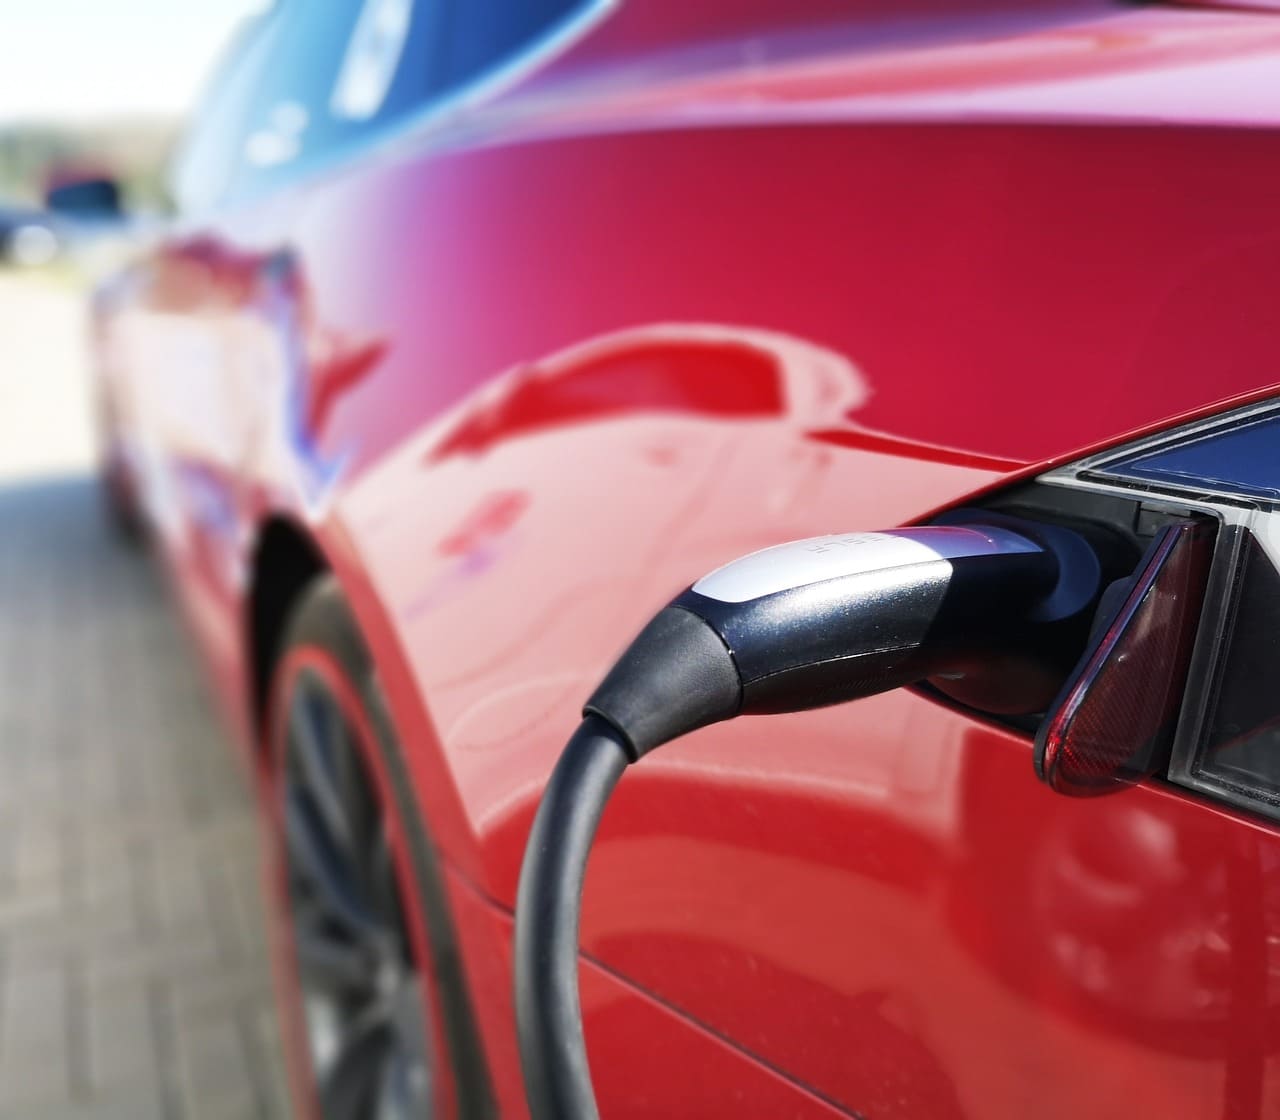 The Impact of Electric Cars on Energy Demand: Exploring the potential impact of widespread electric vehicle adoption on the electrical grid and energy markets